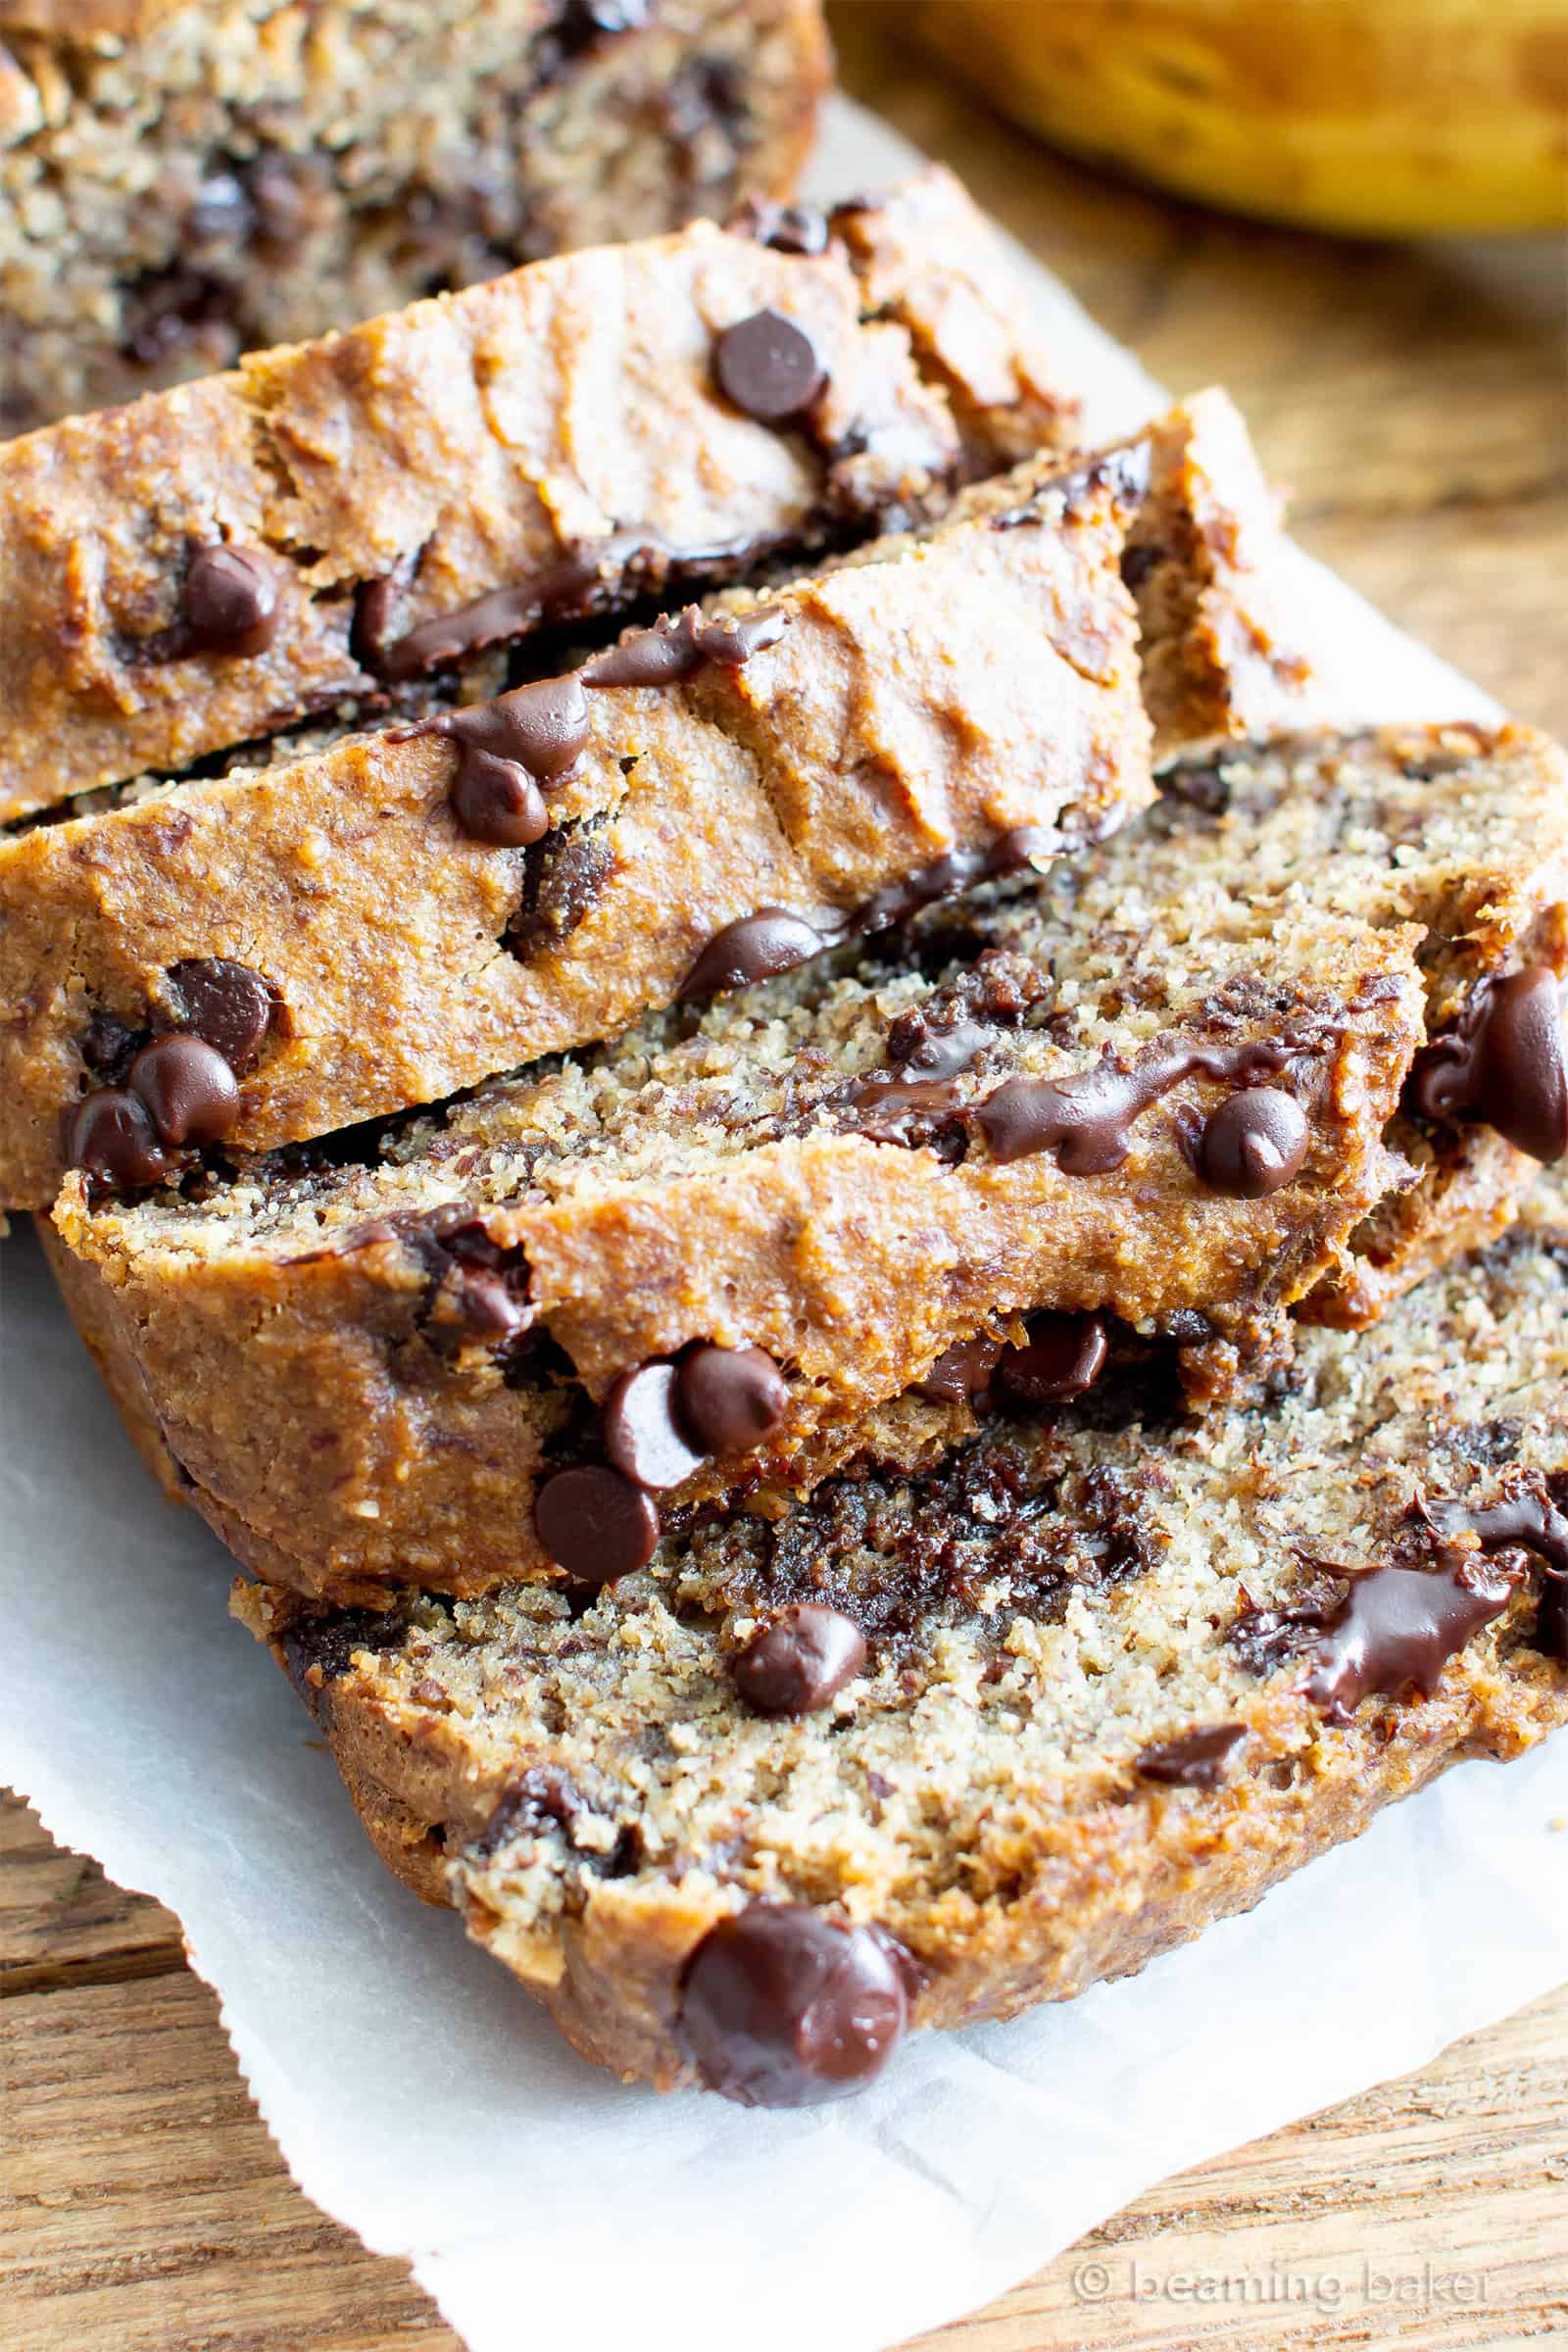 Best Moist Chocolate Chip Banana Bread Recipe (V, GF): a one bowl recipe for deliciously moist banana bread bursting with chocolate and made with healthy, whole ingredients. #Vegan #GlutenFree #DairyFree #Healthy #QuickBreads | Recipe at BeamingBaker.com